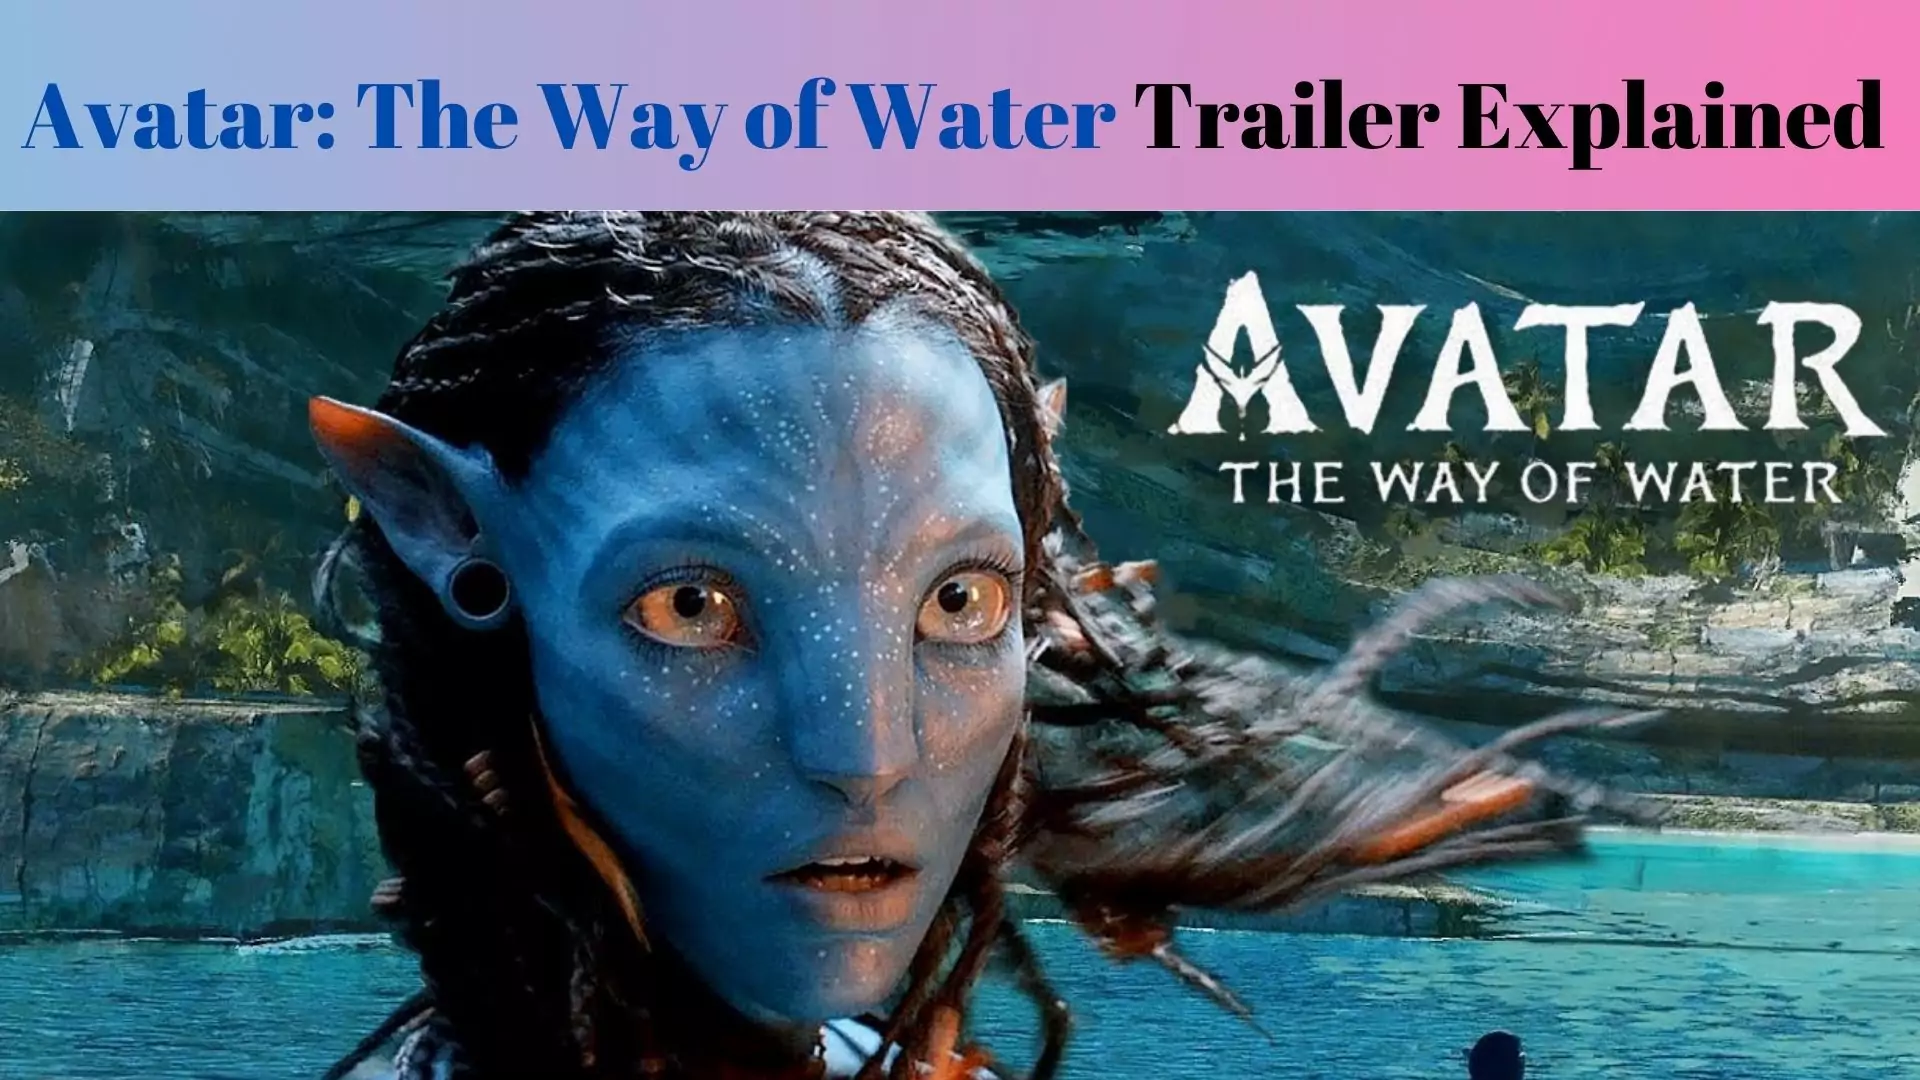 Avatar: The Way of Water Trailer Explained